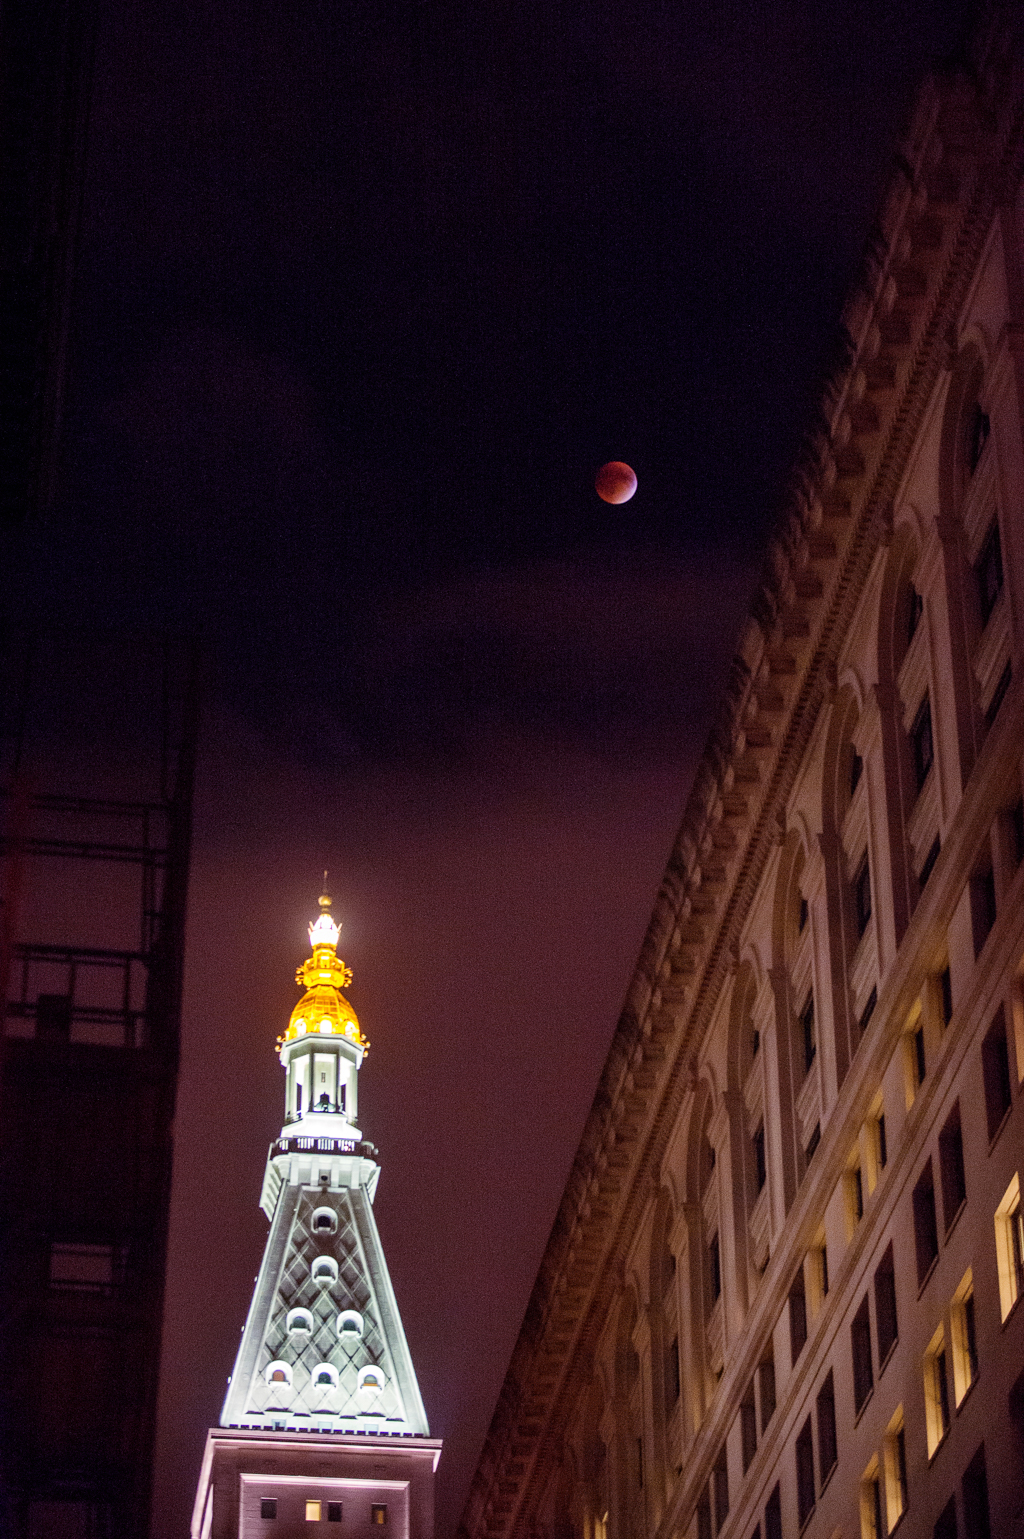 a lunar eclipse shows a red moon in the sky over nyc clock tower in gramercy park